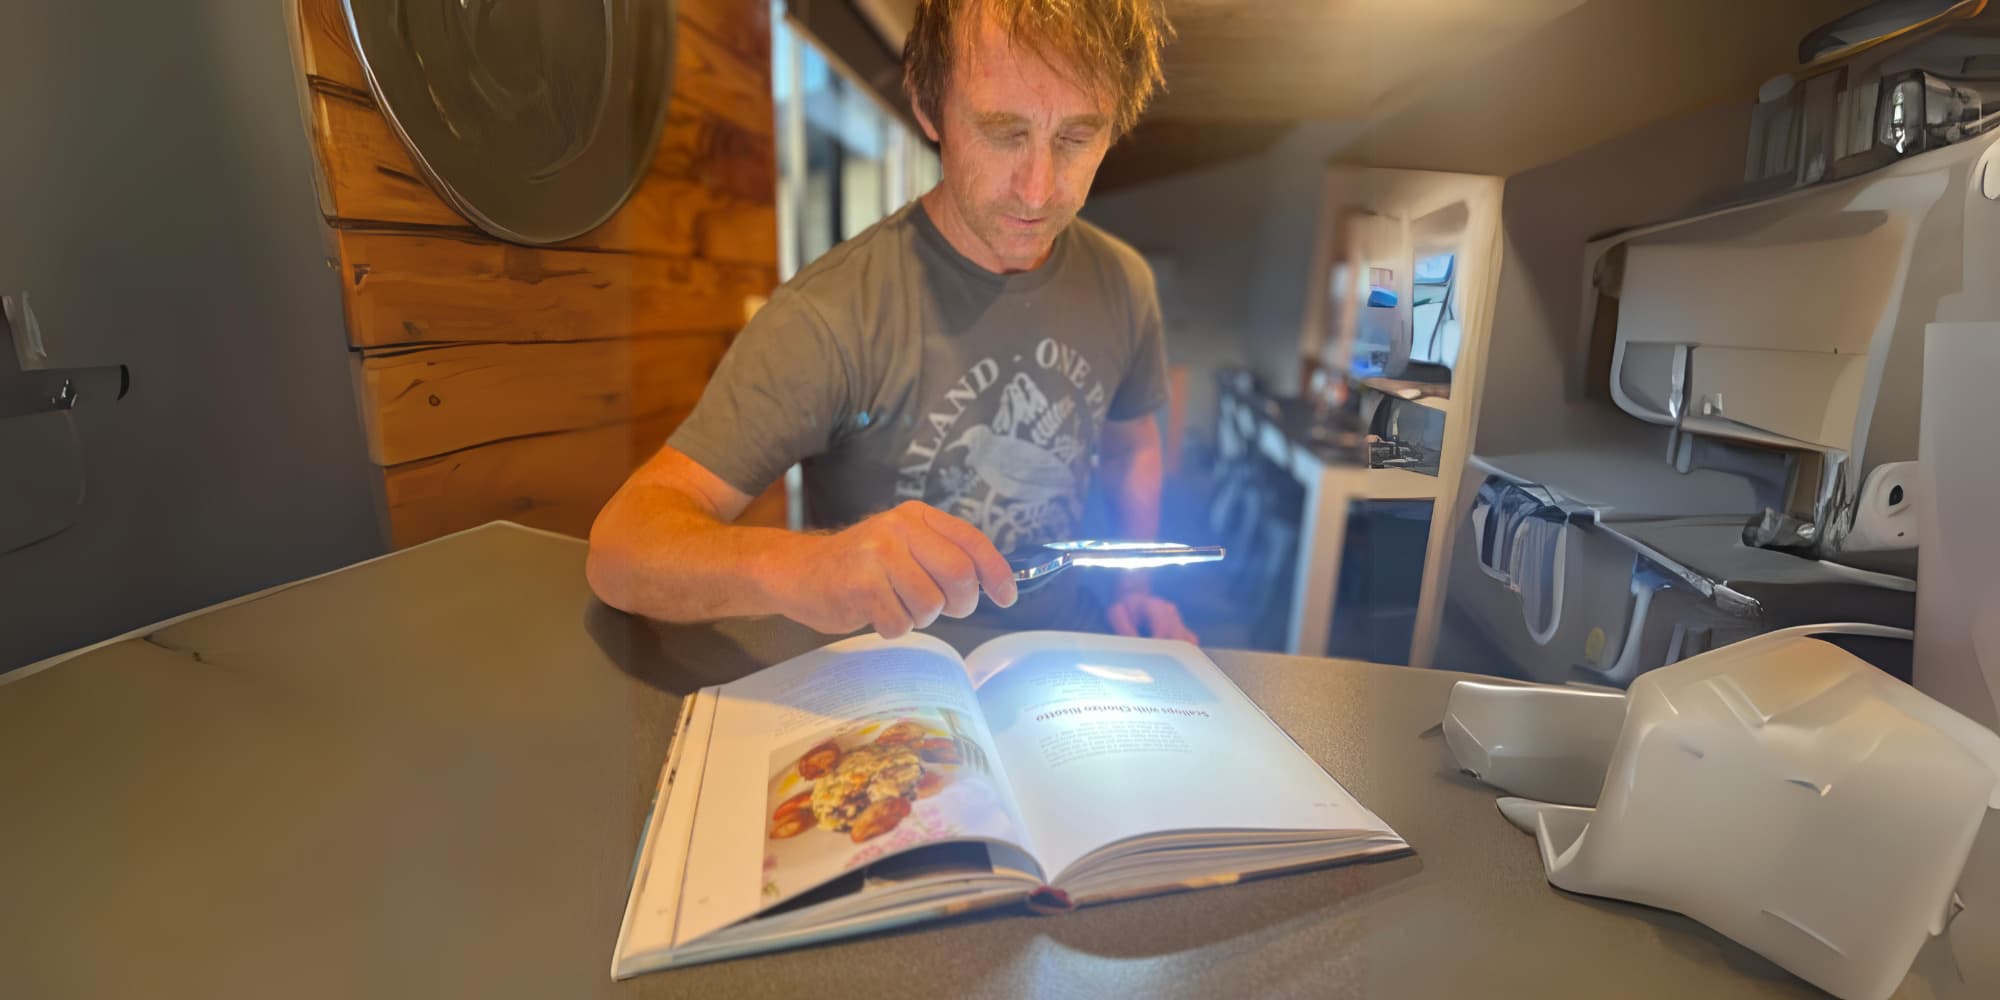 A person is seated at a kitchen counter, reading a book with the aid of a magnifier with flashlight. The kitchen is well-equipped with various appliances, and the counter is spacious and clean.